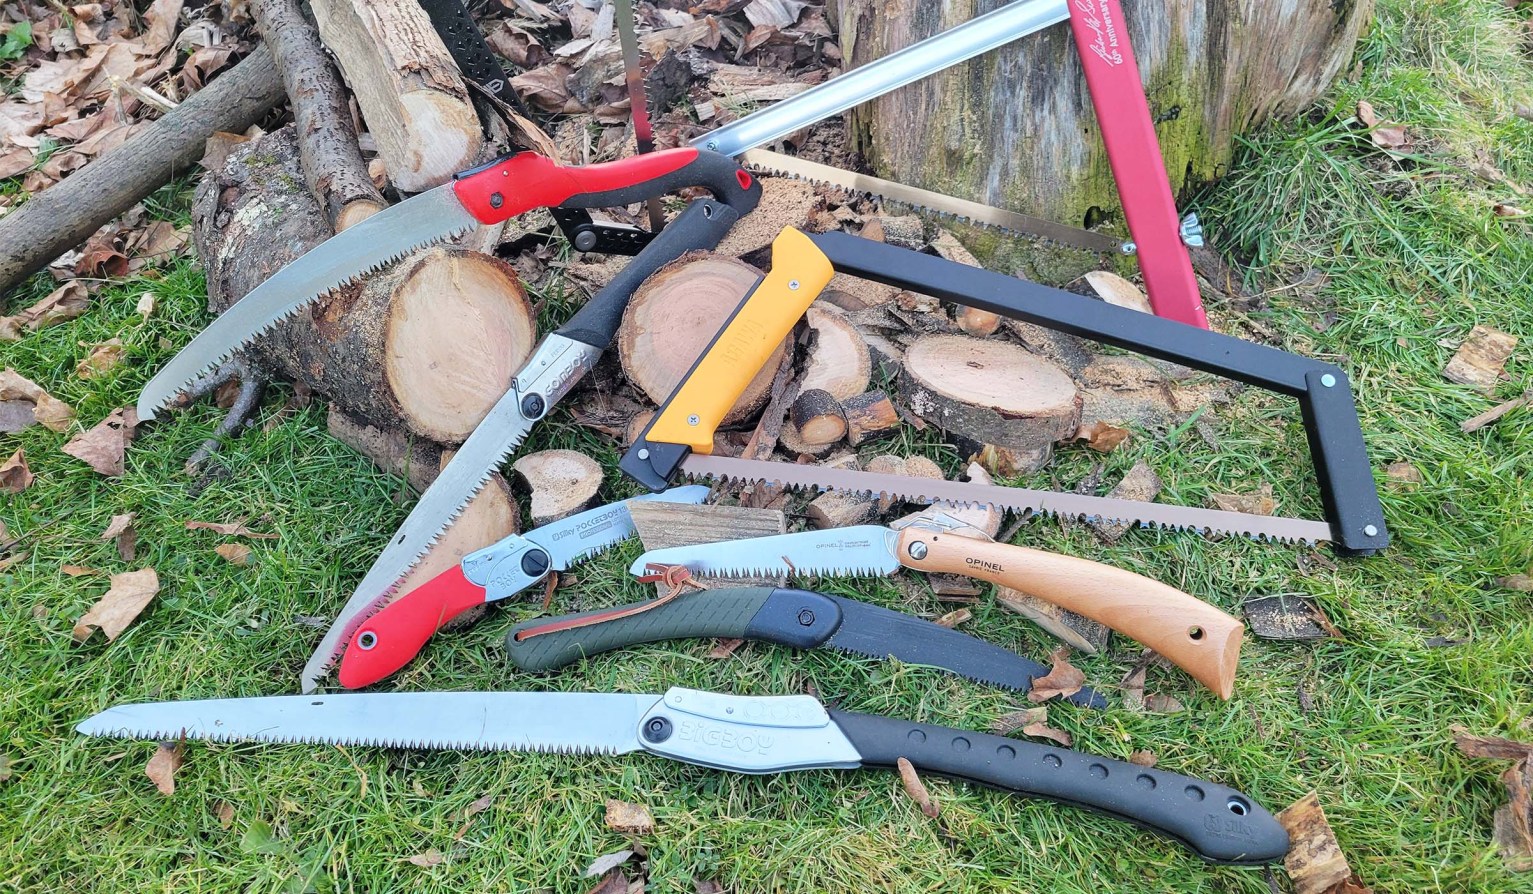 Testing the best folding saws by cutting wood of different diameters.